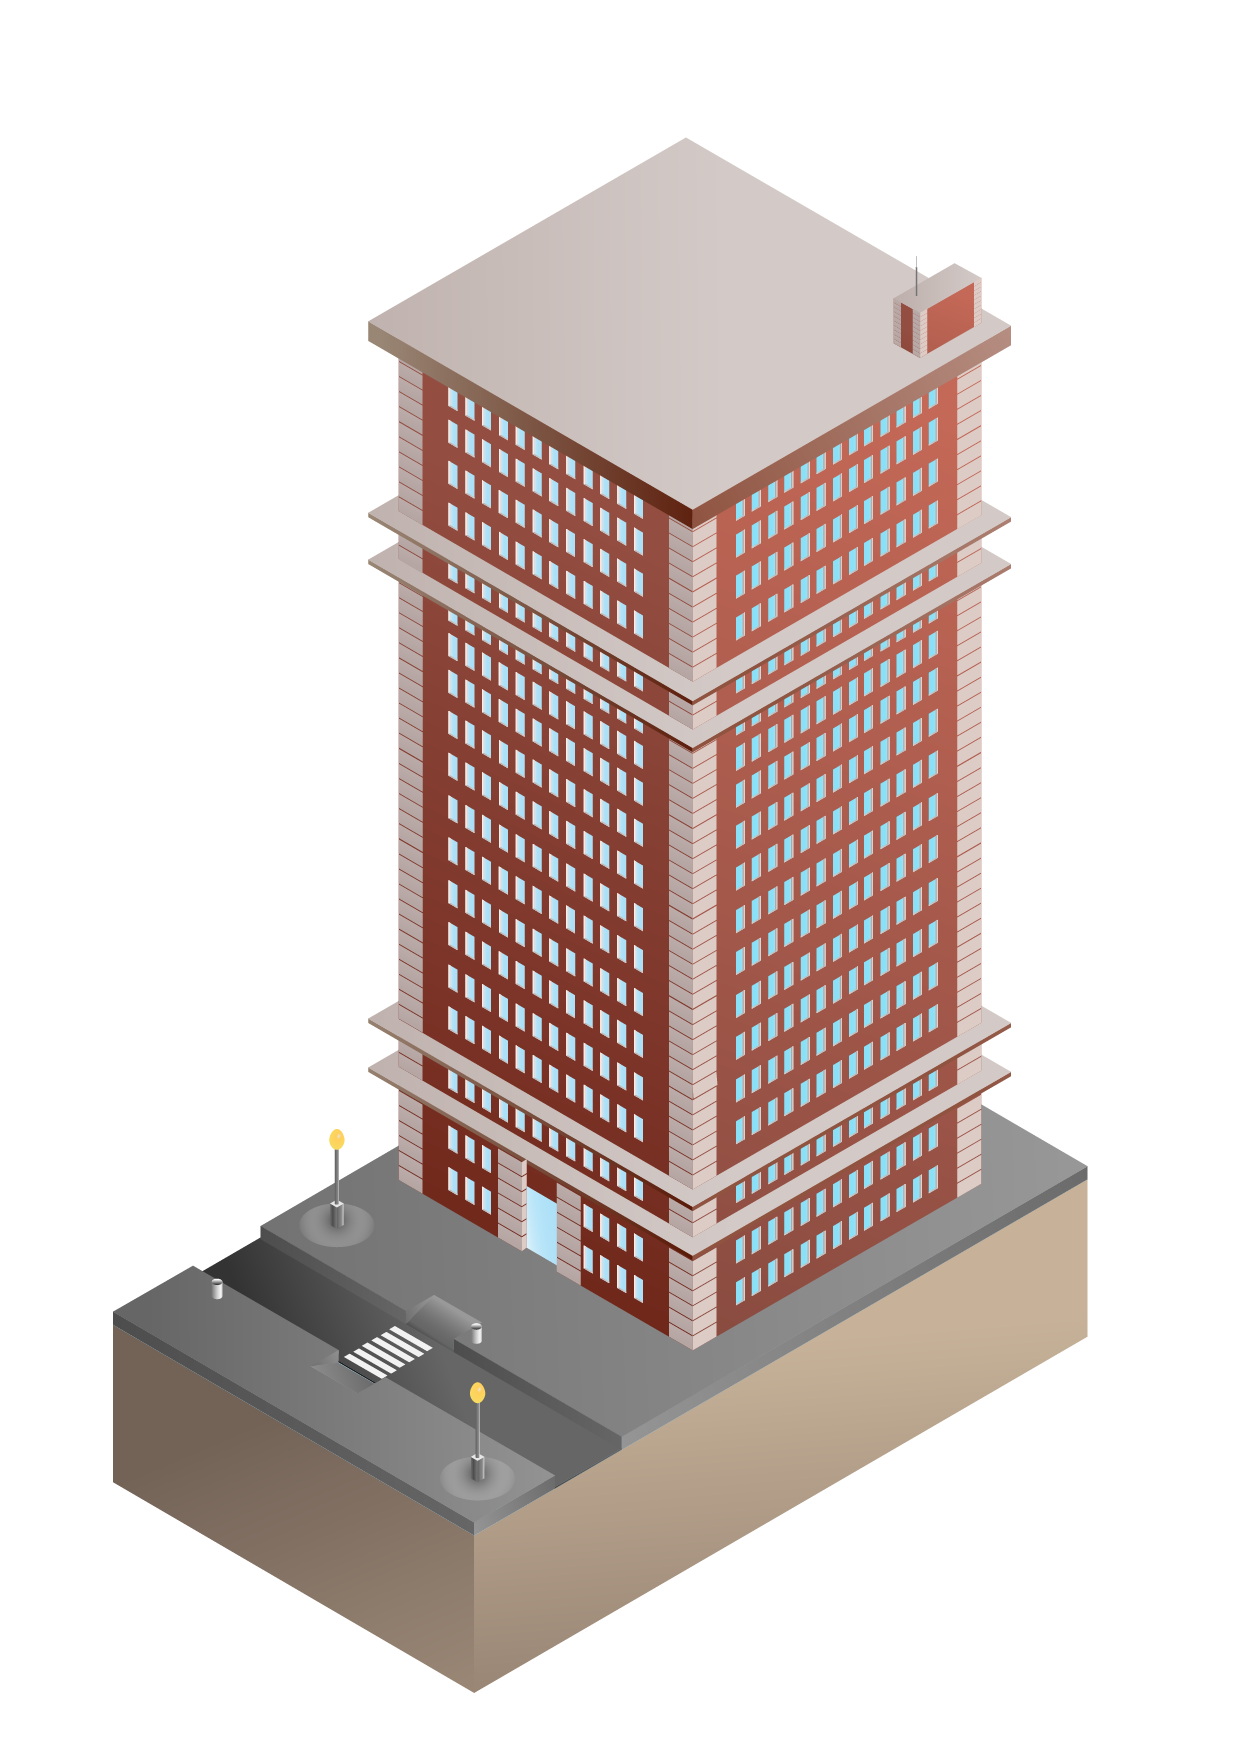 Isometric Building by Hugohil on DeviantArt